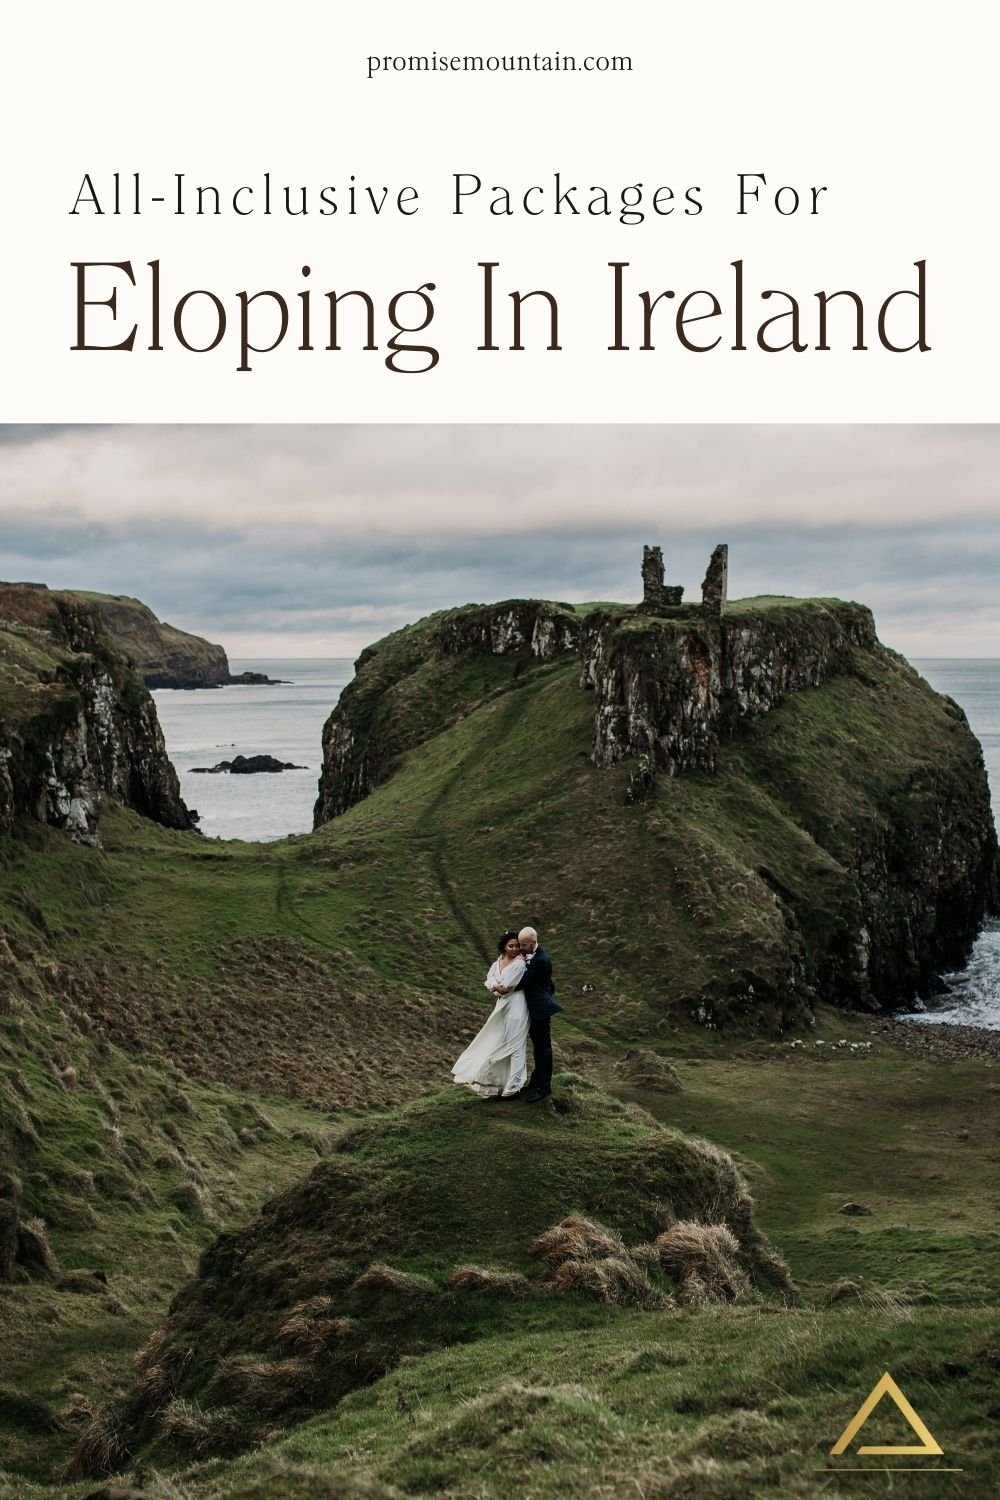 Couple sharing an embrace by the coast of Ireland; image overlaid with text that reads All-inclusive elopement Packages for Eloping in Ireland